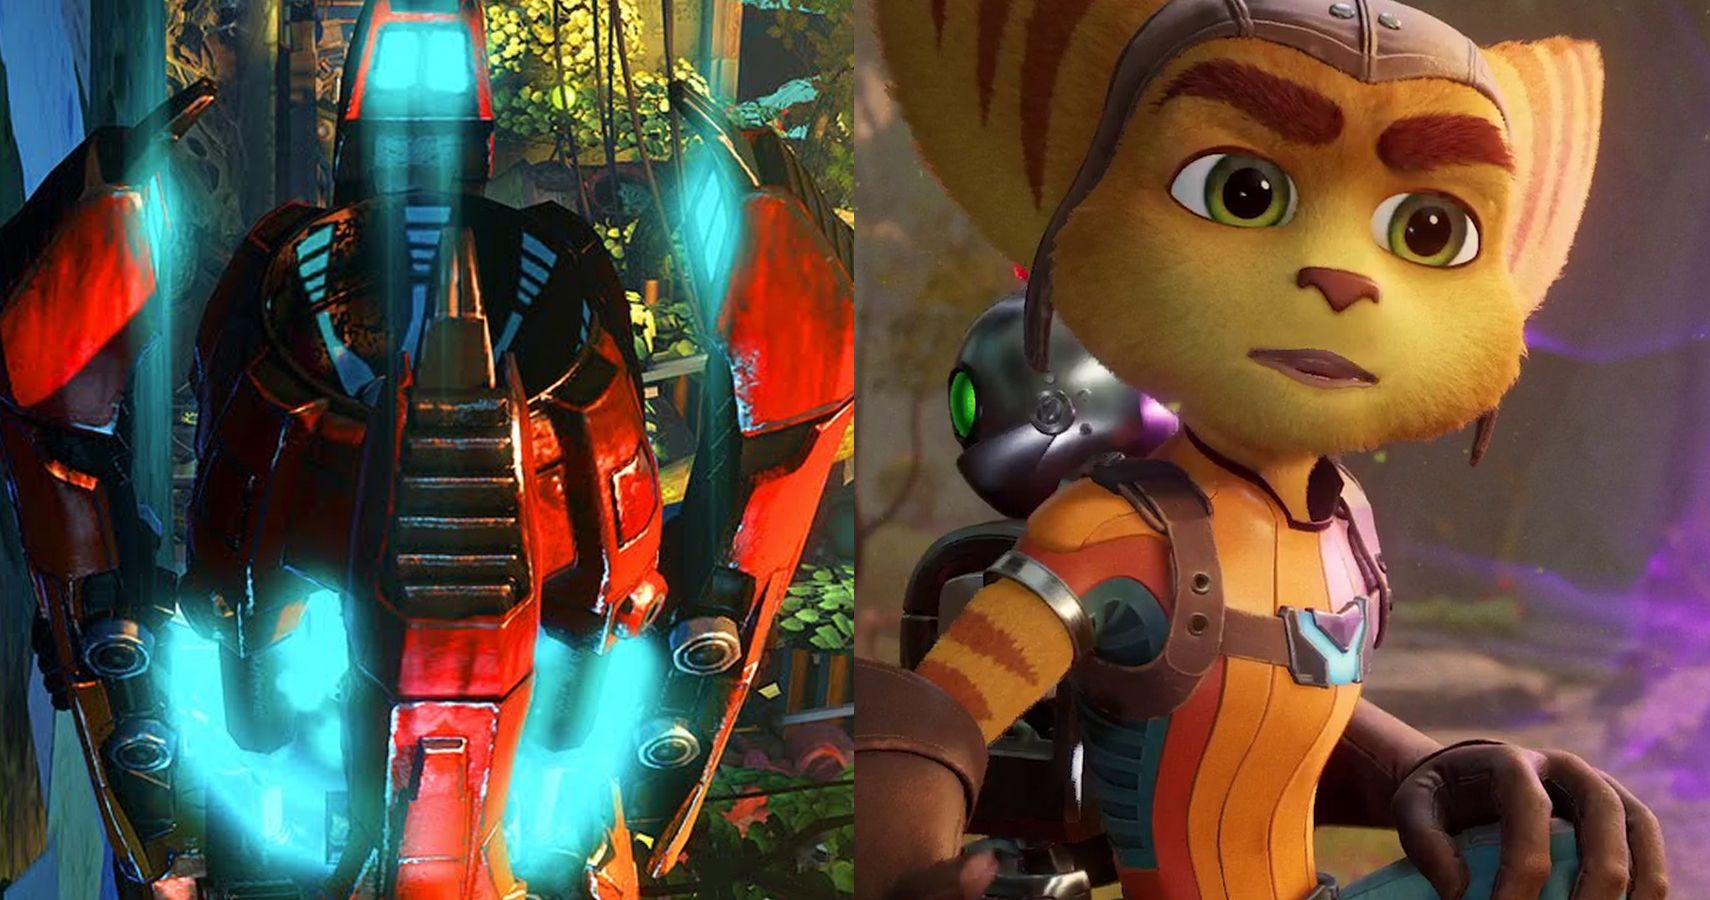 Ratchet & Clank: Size Matters (Game) - Giant Bomb